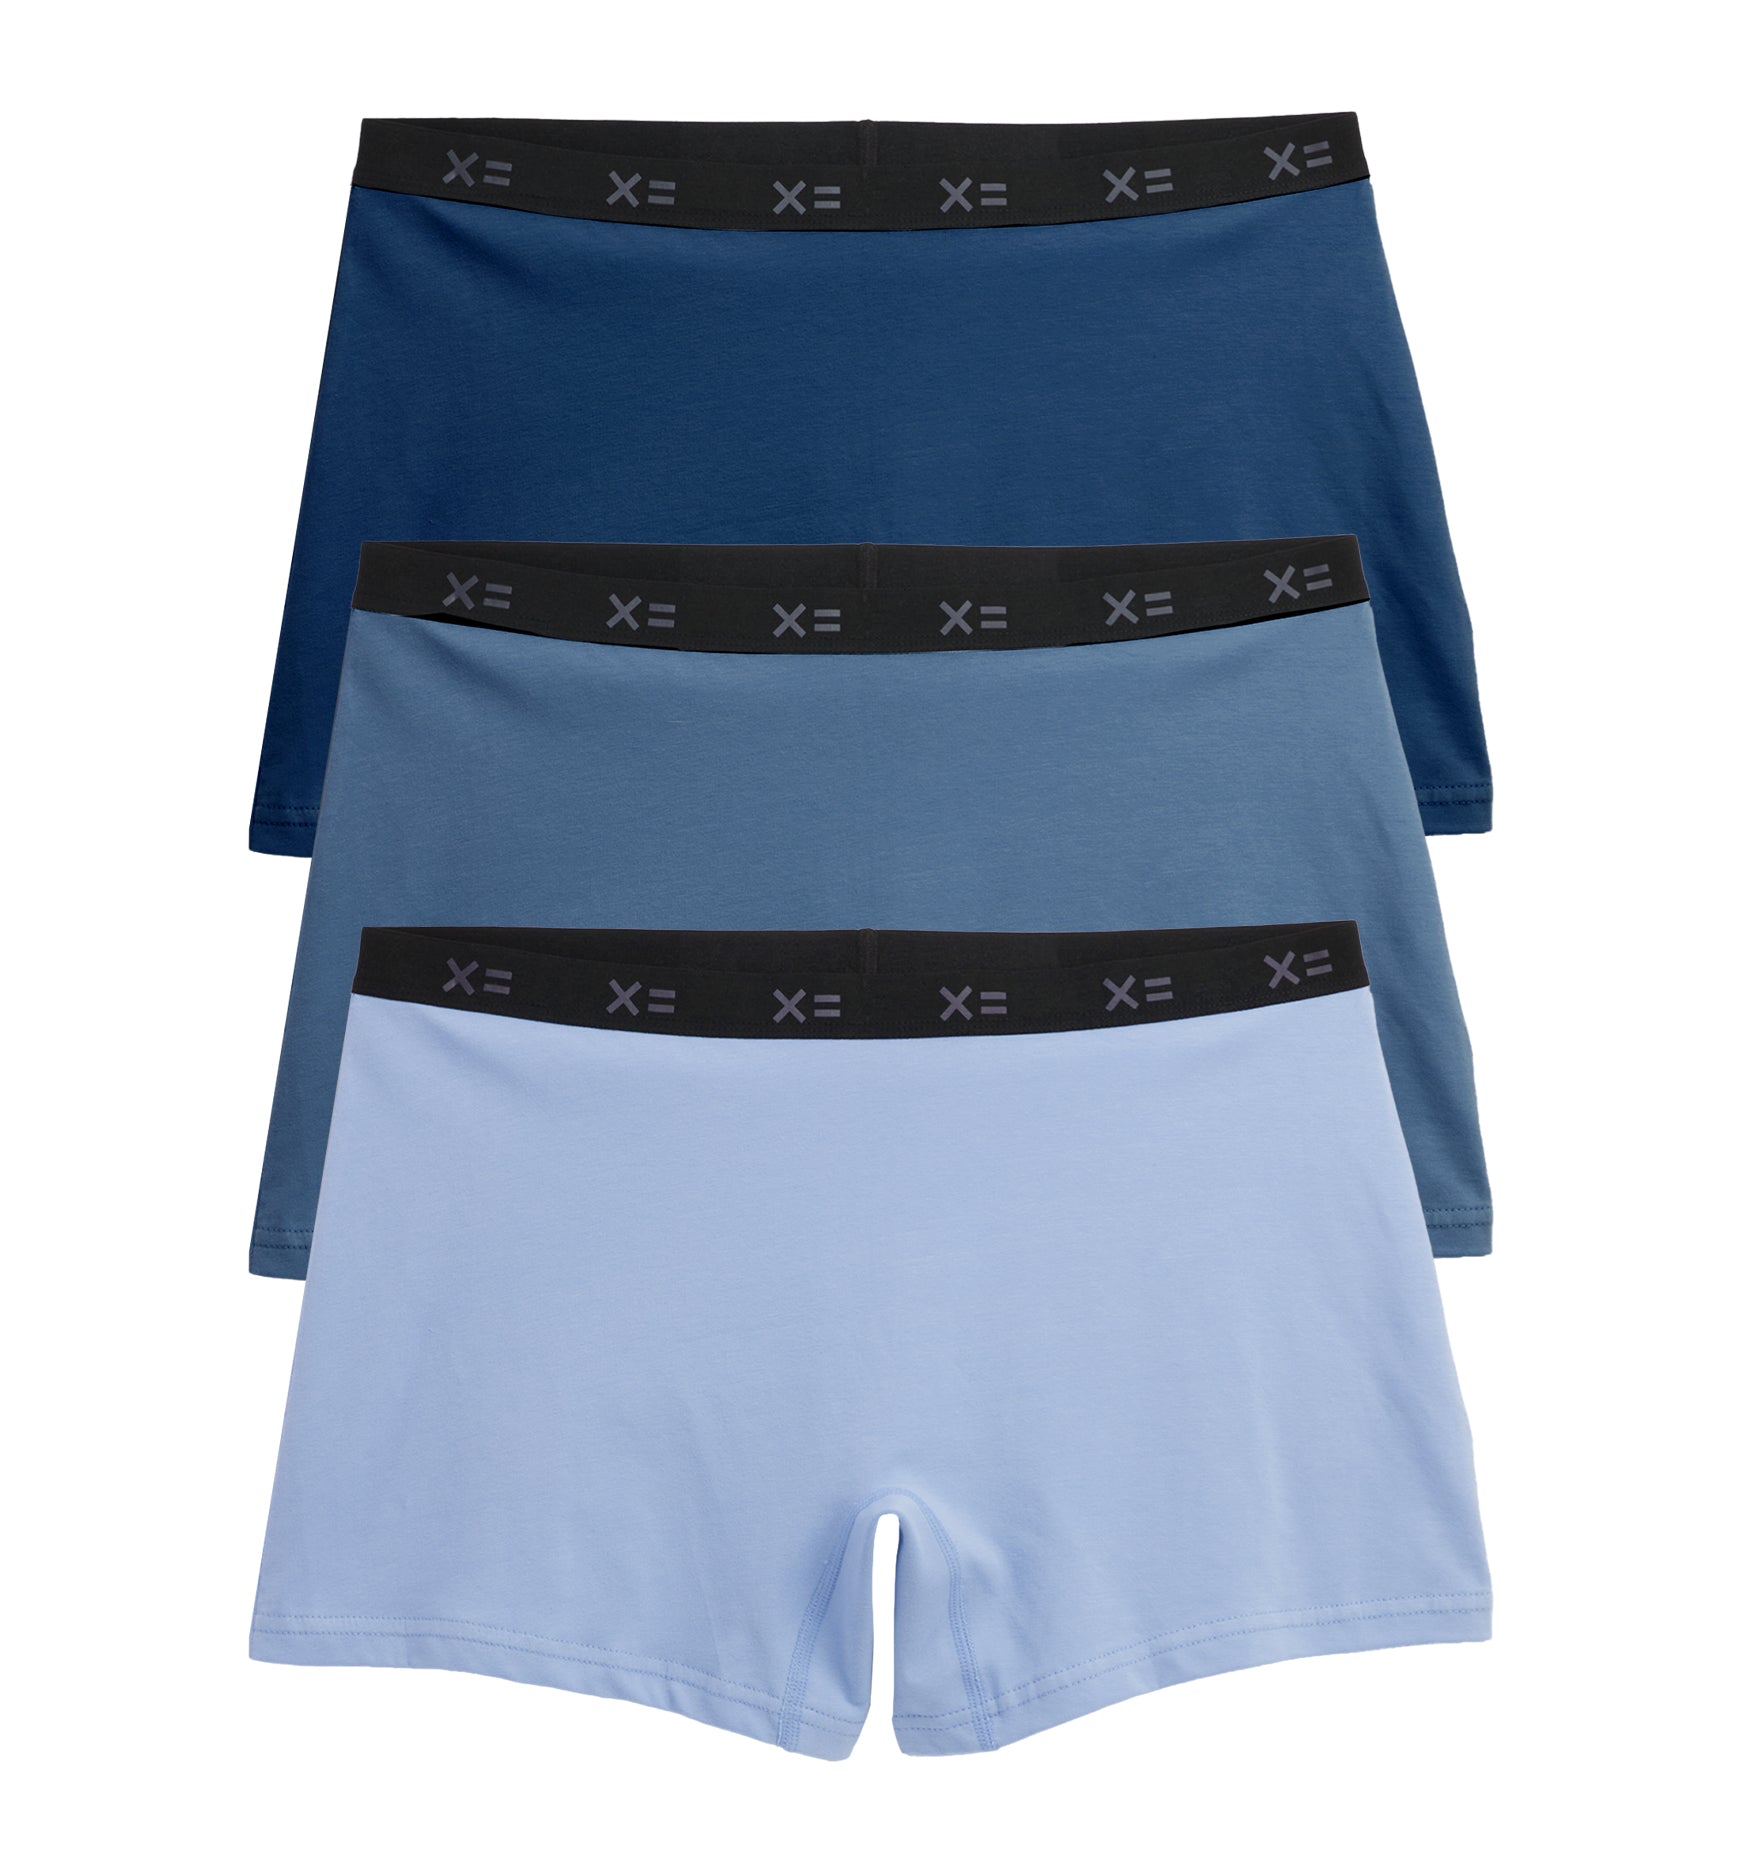 TomboyX Underwear, Boxers & Socks for Young Adult Men